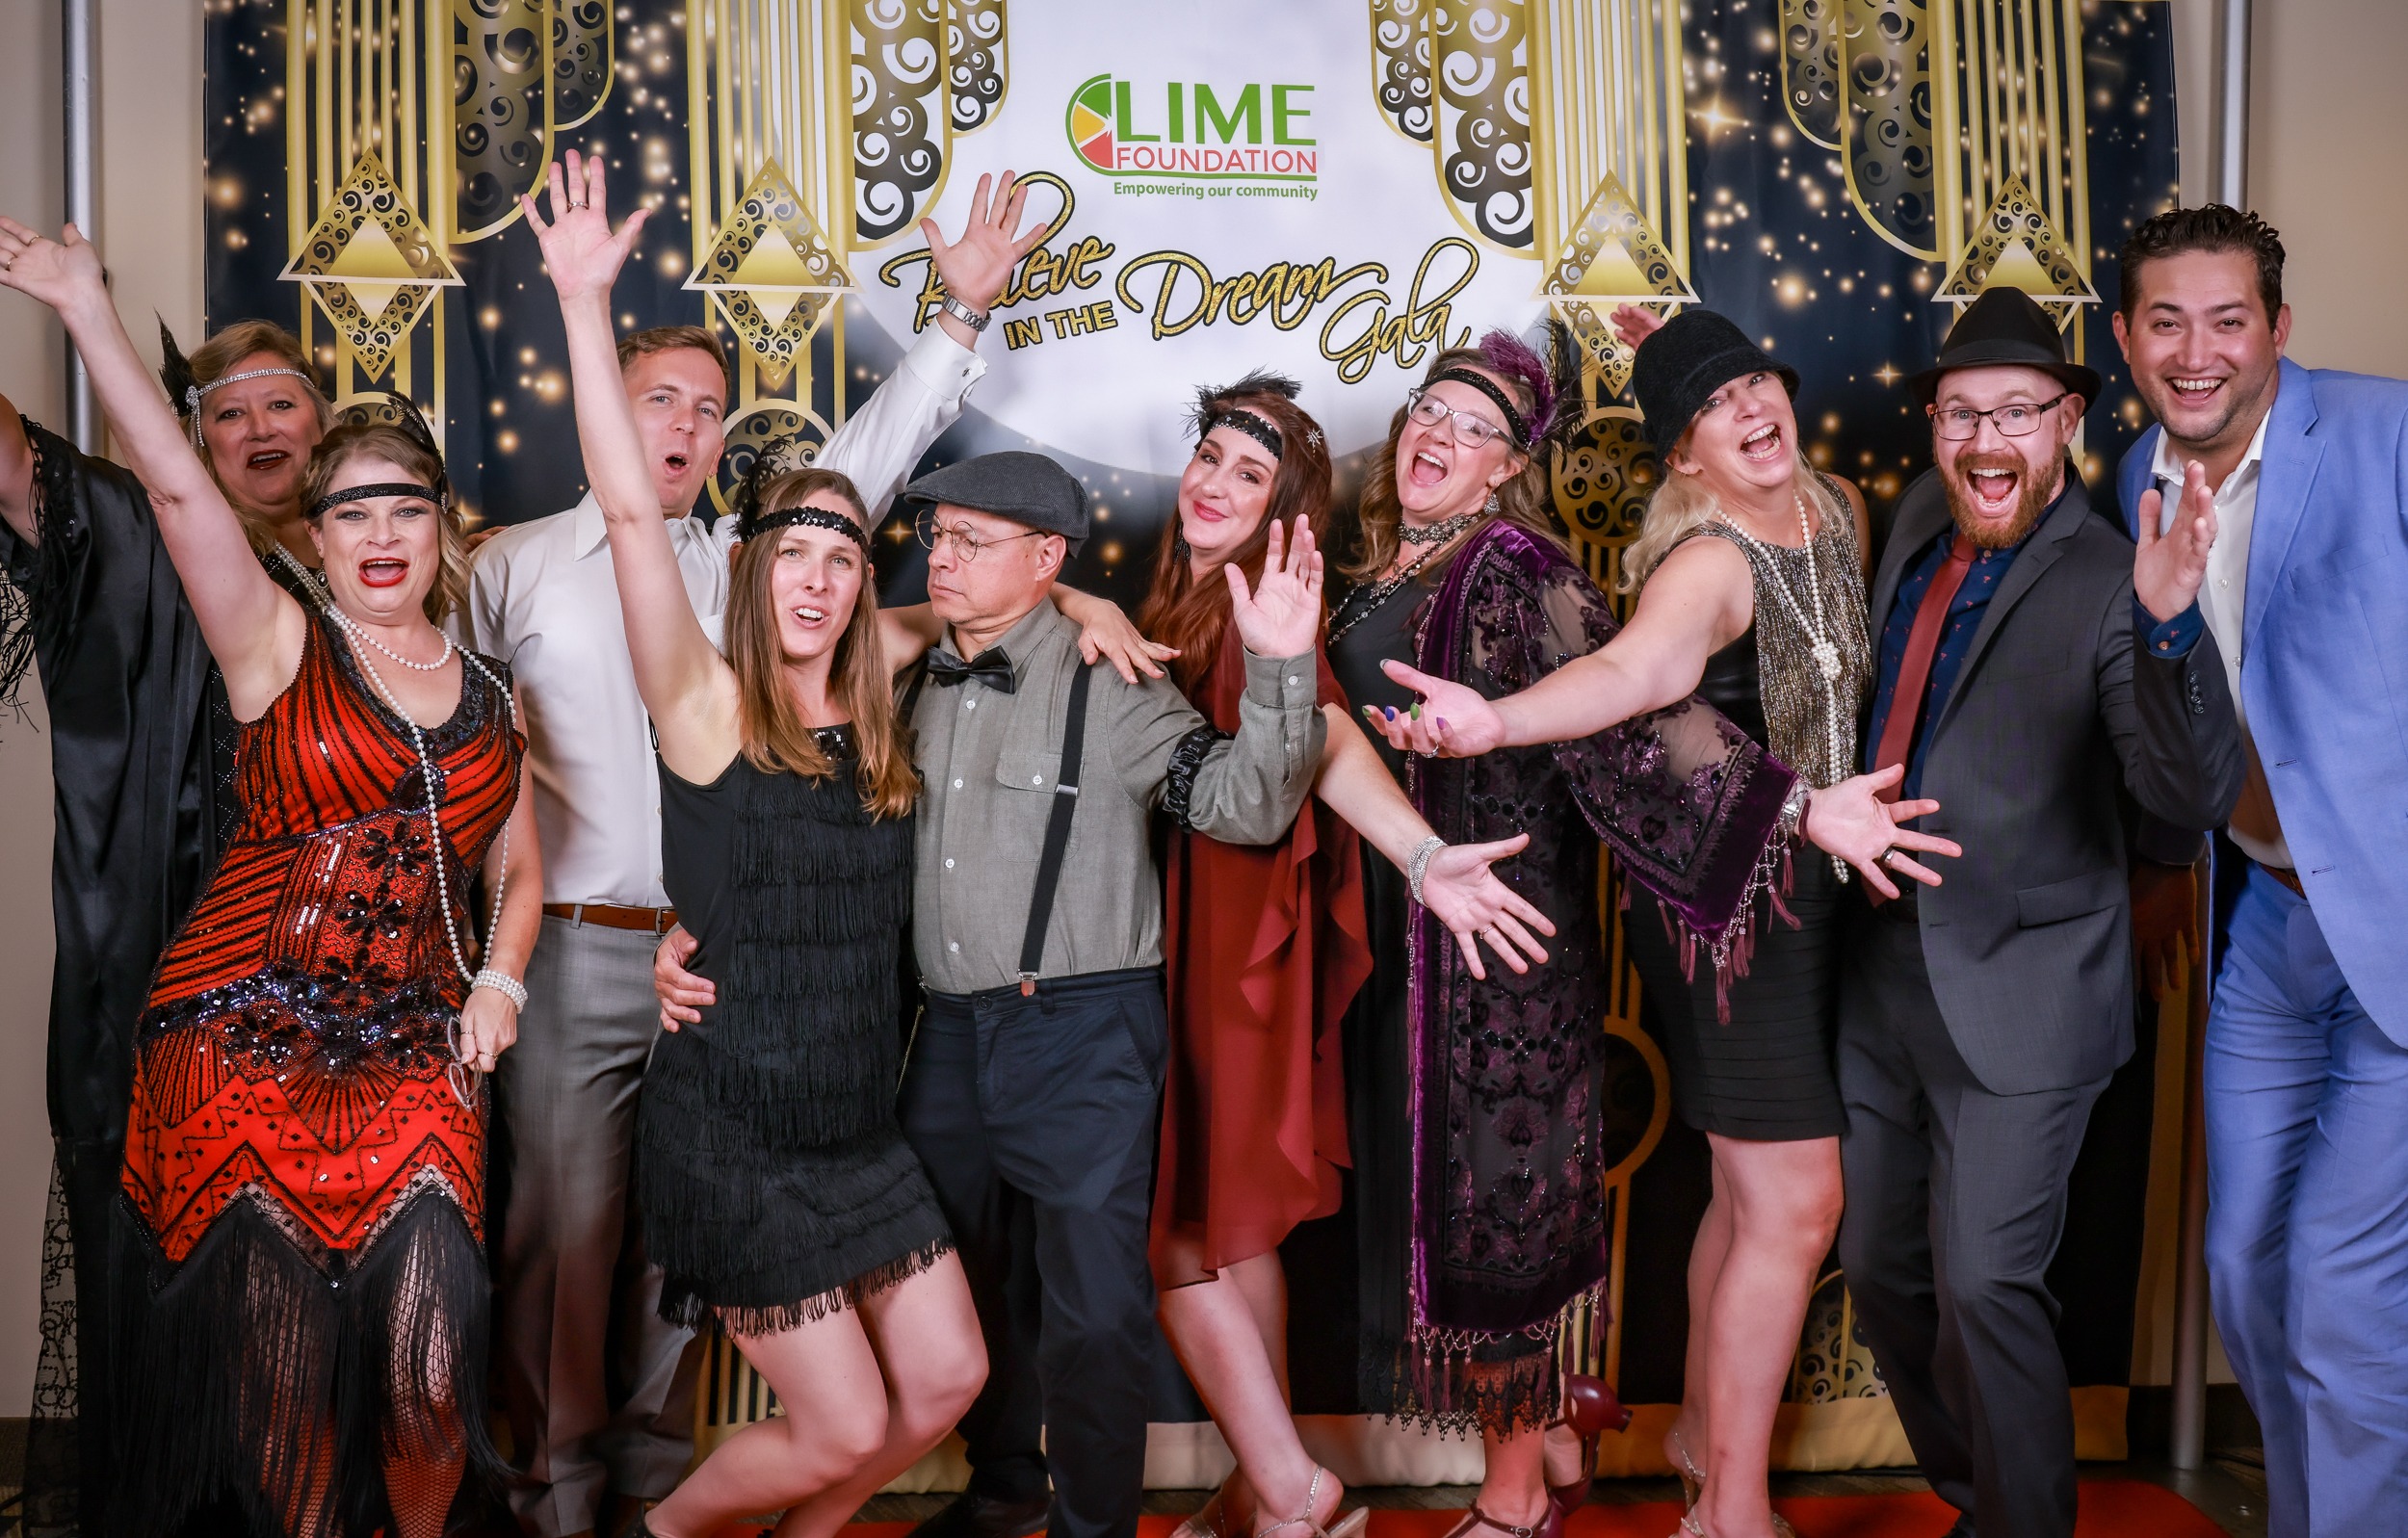 A group of people posing for a photo at a party organized by The LIME Foundation of Santa Rosa.